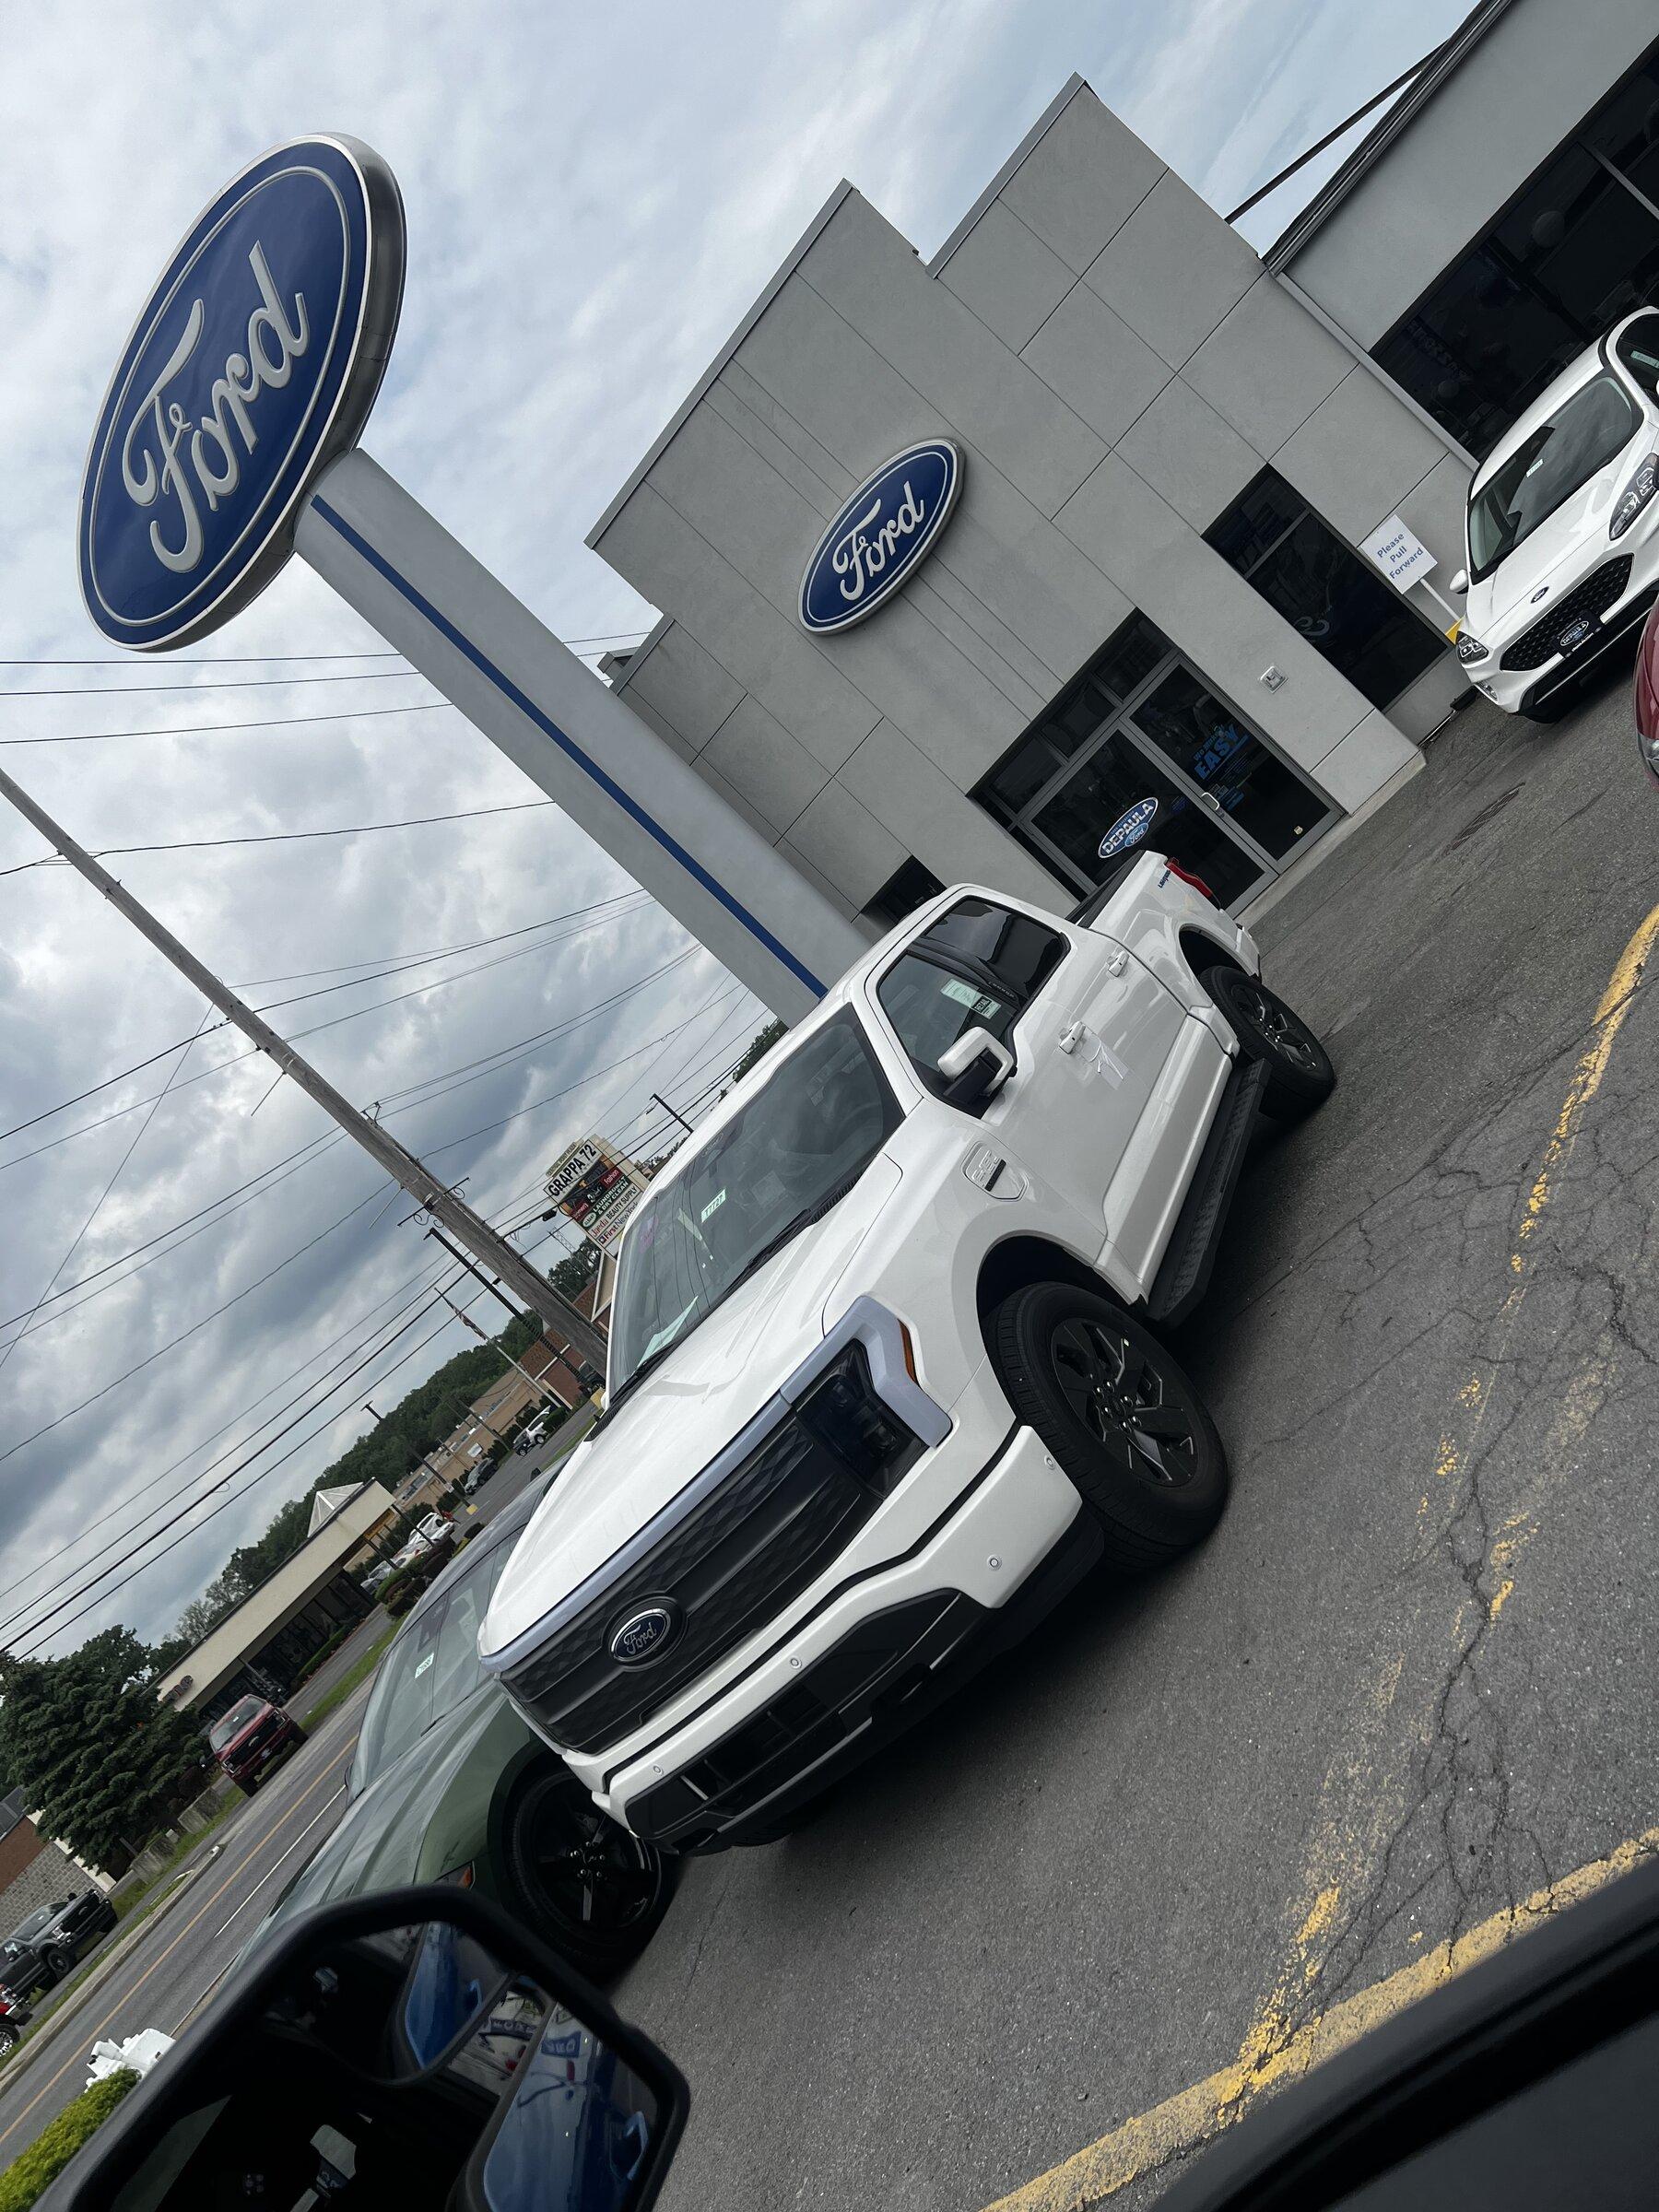 Ford F-150 Lightning Truck got delivered to my dealer 18 days early! Picking up tomorrow! 59DC7FD8-A322-4D96-BA73-42668B963A87